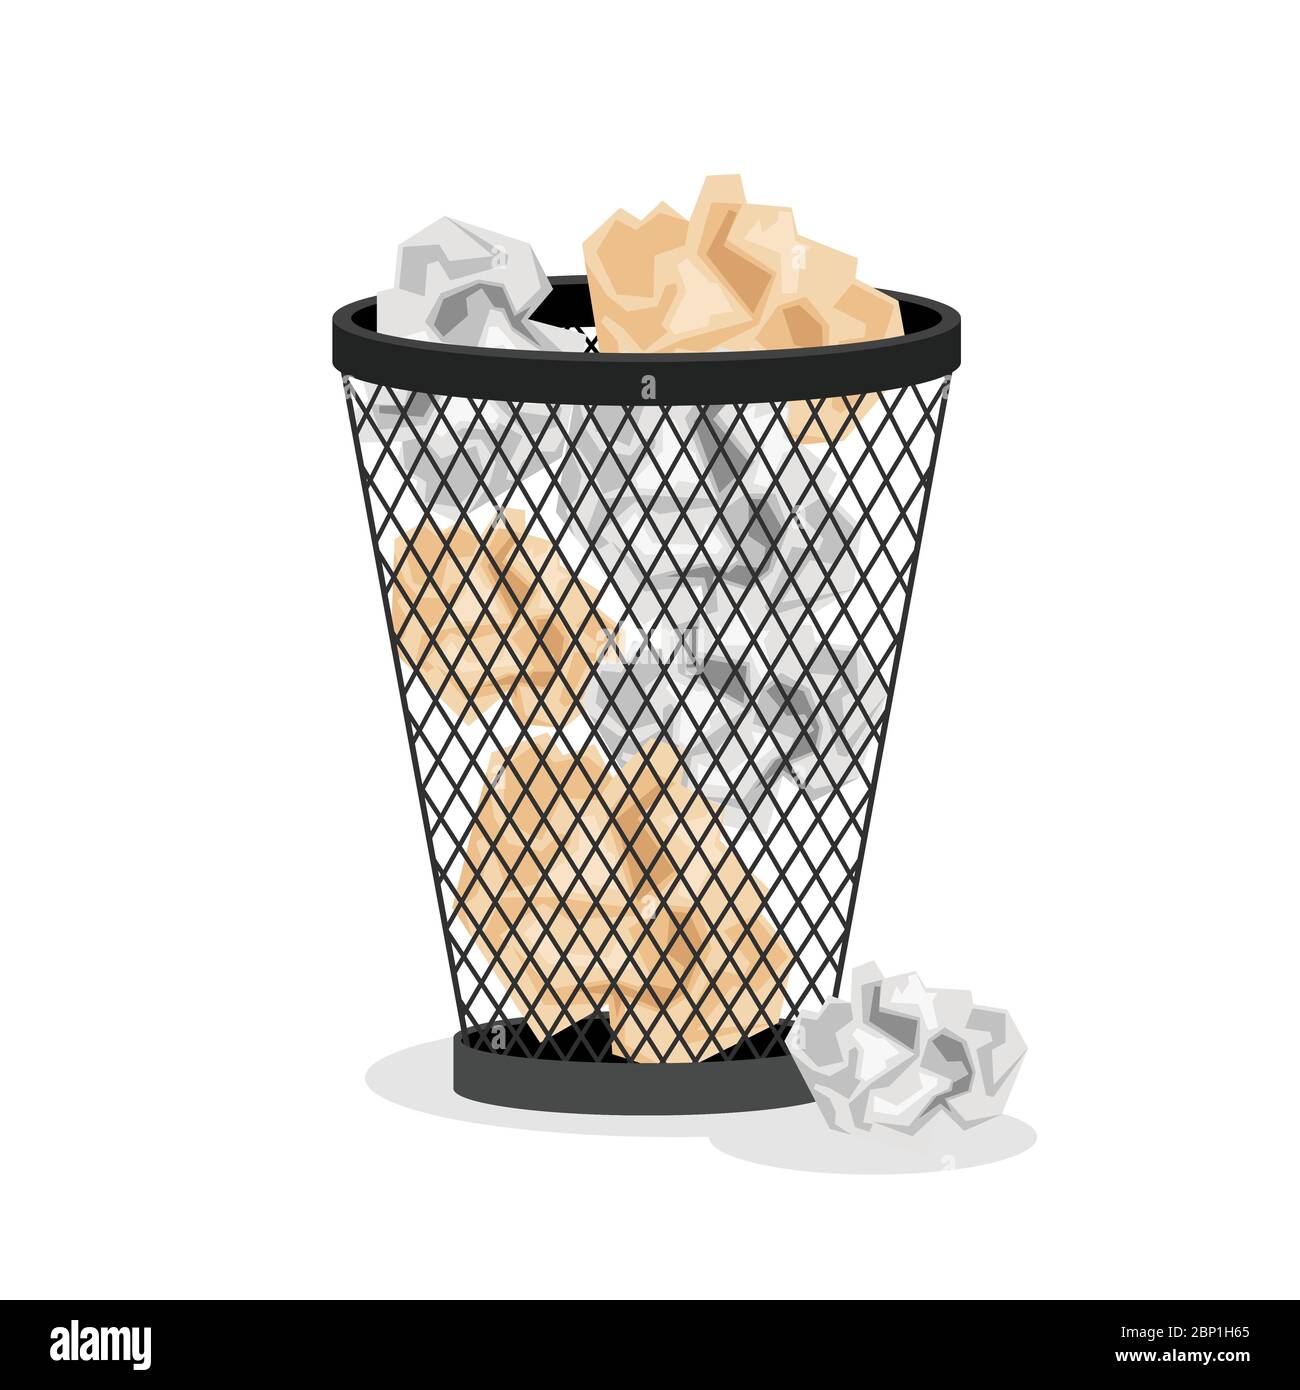 https://c8.alamy.com/comp/2BP1H65/office-basket-with-crumpled-paper-isolated-on-white-background-vector-illustration-2BP1H65.jpg